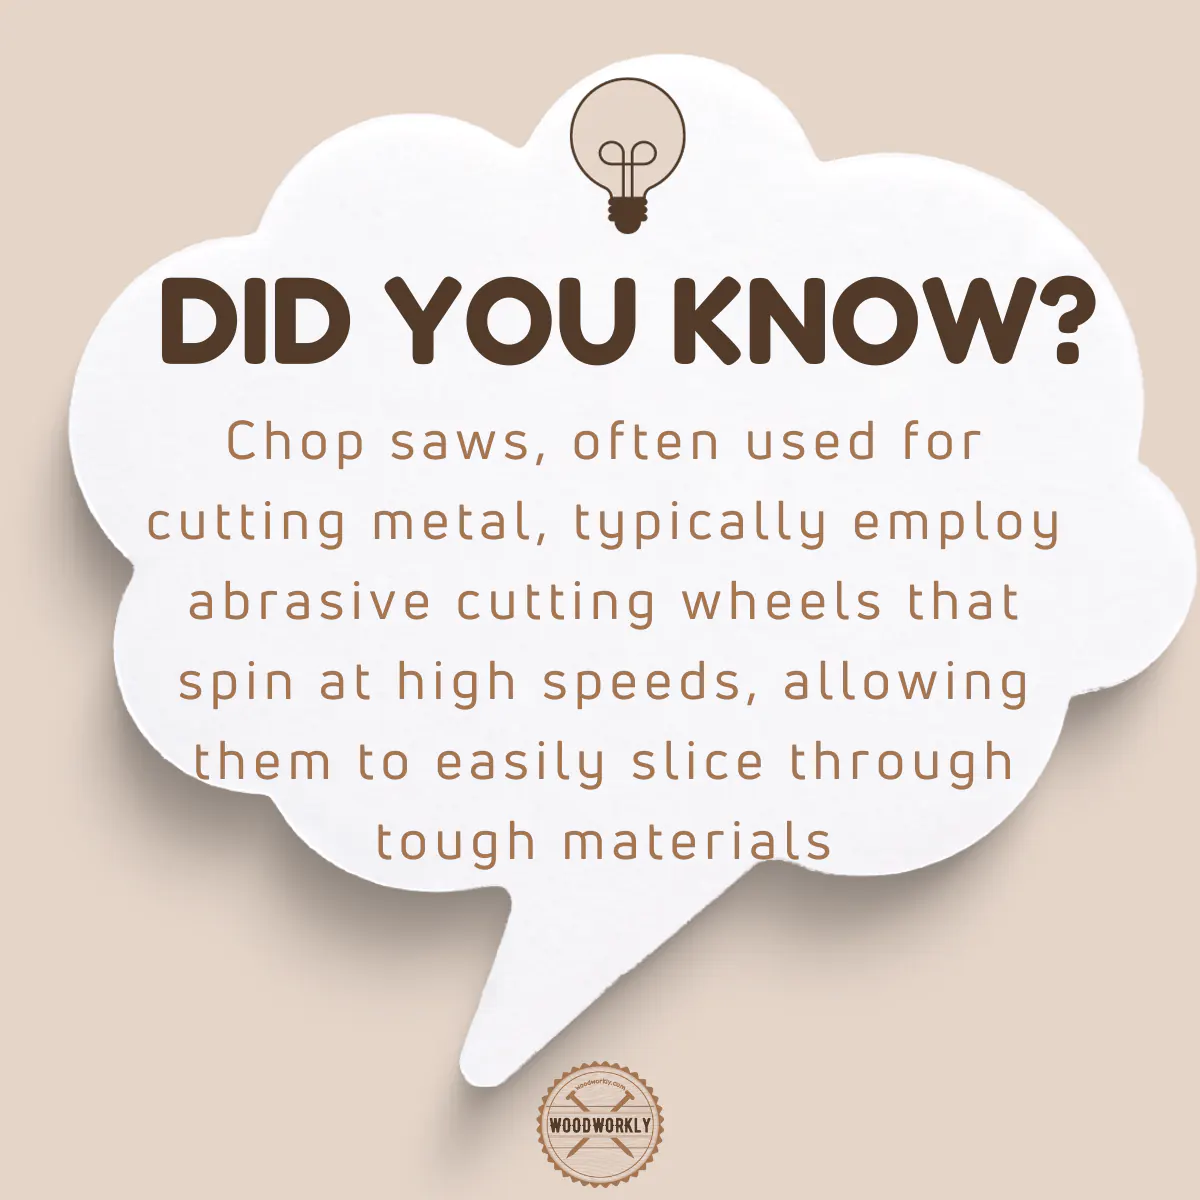 Did you know fact about Chop Saw